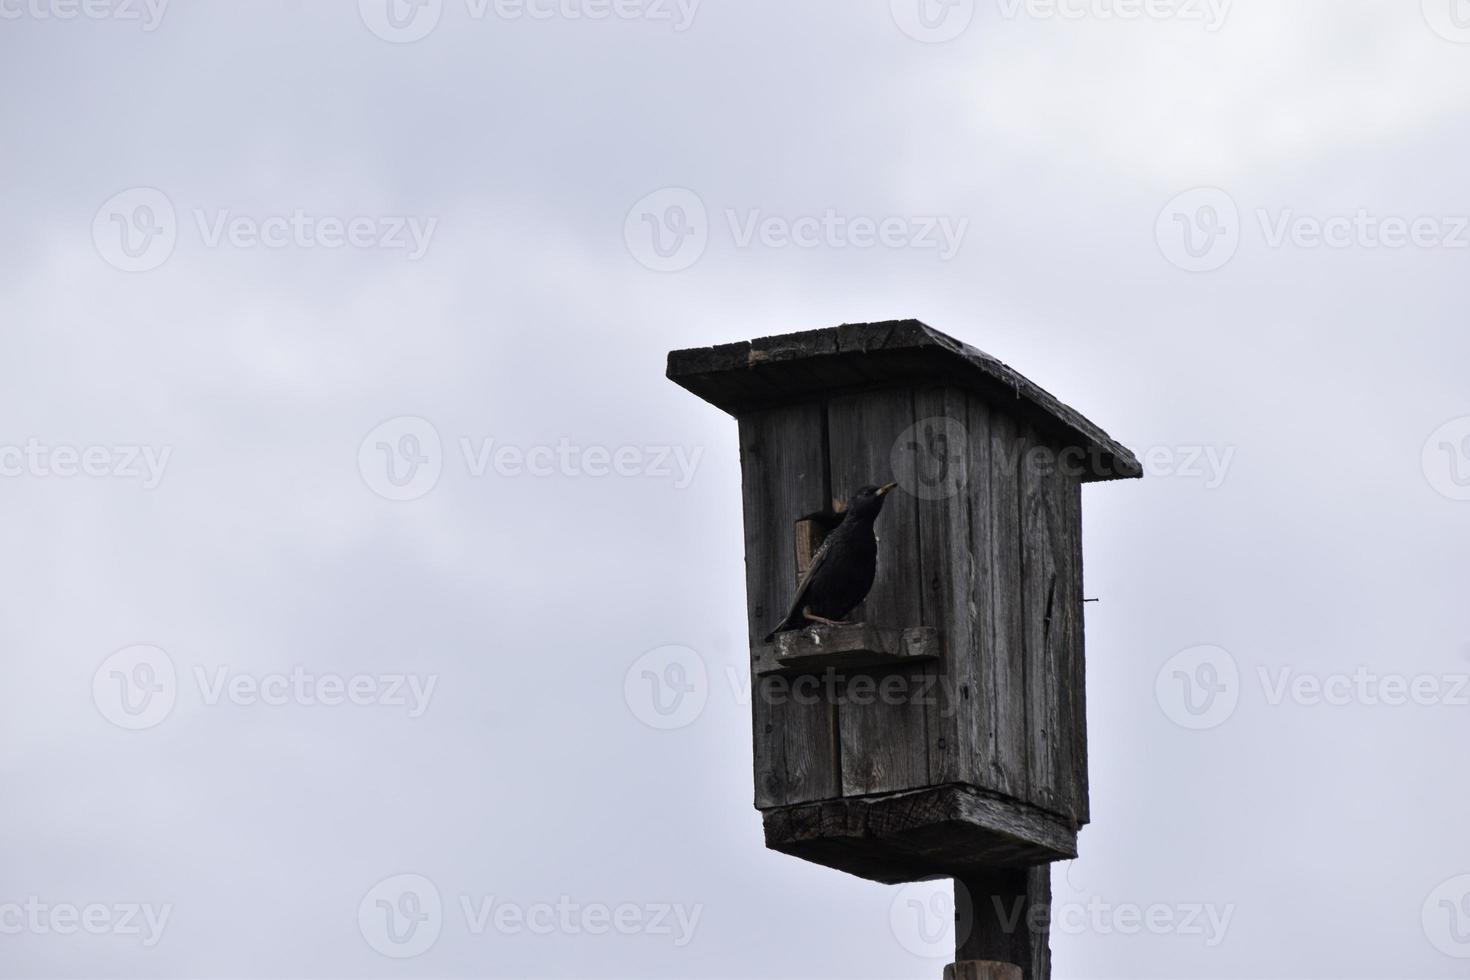 Birdhouse on the background of a wooden birdhouse photo